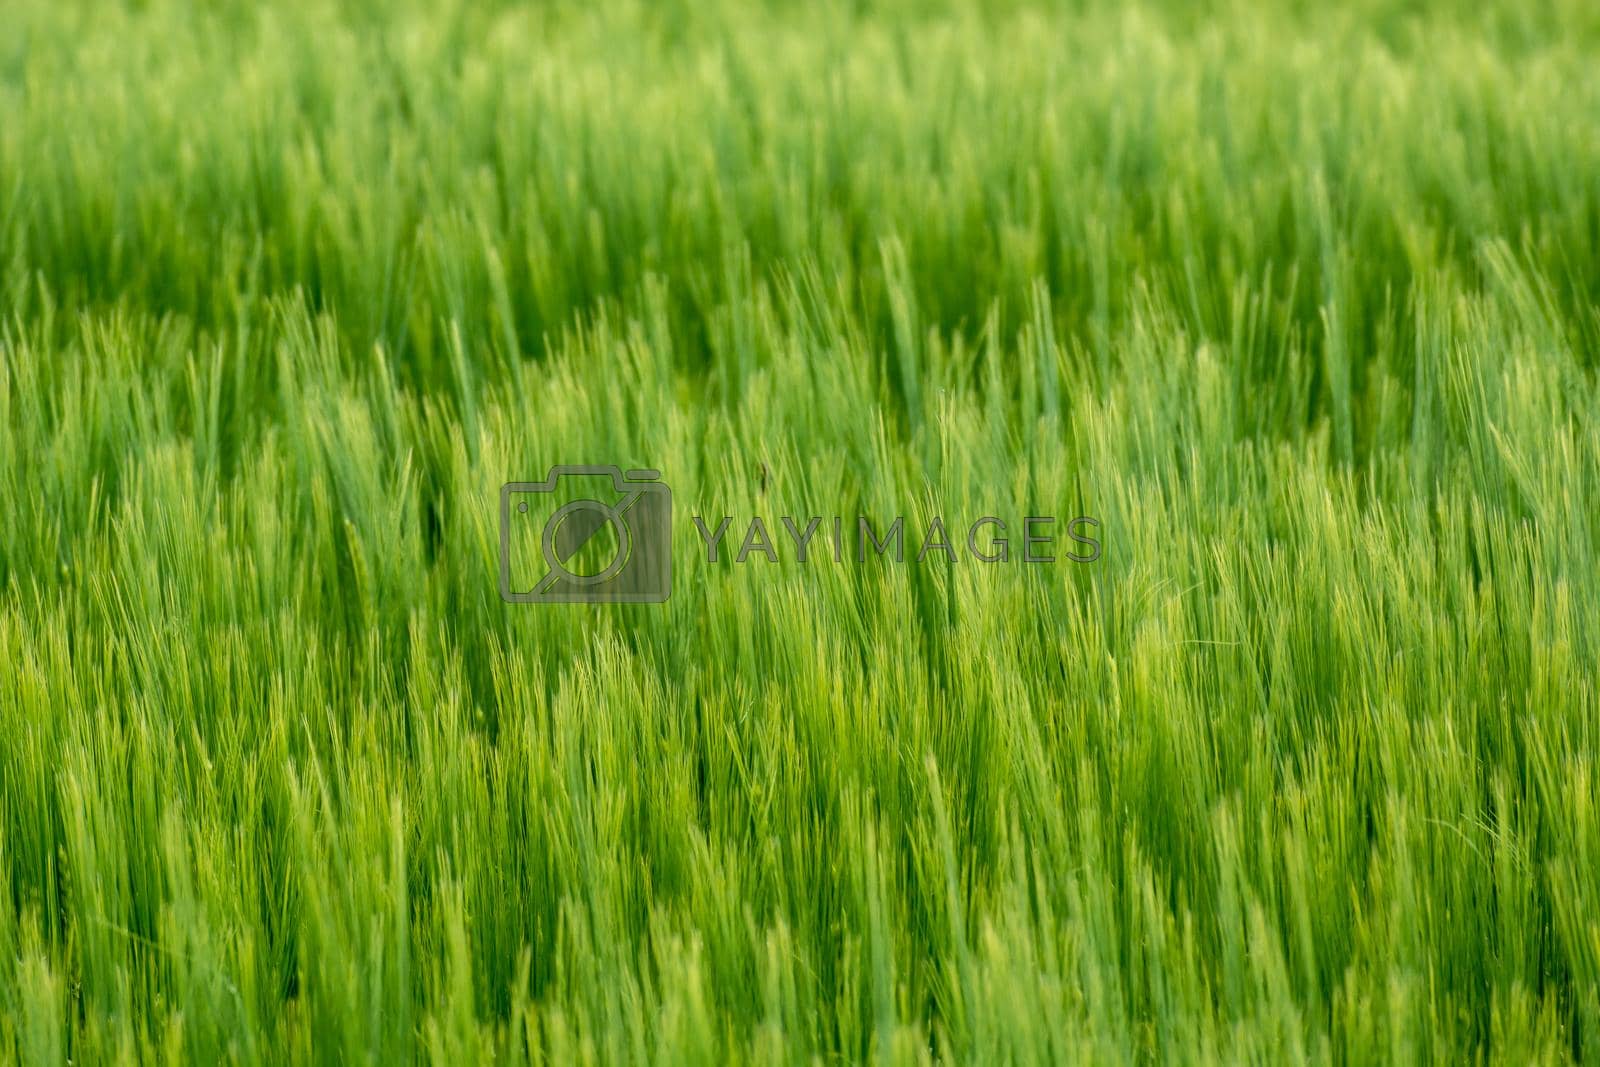 Royalty free image of Green dense ears of barley, cereal background by darekb22